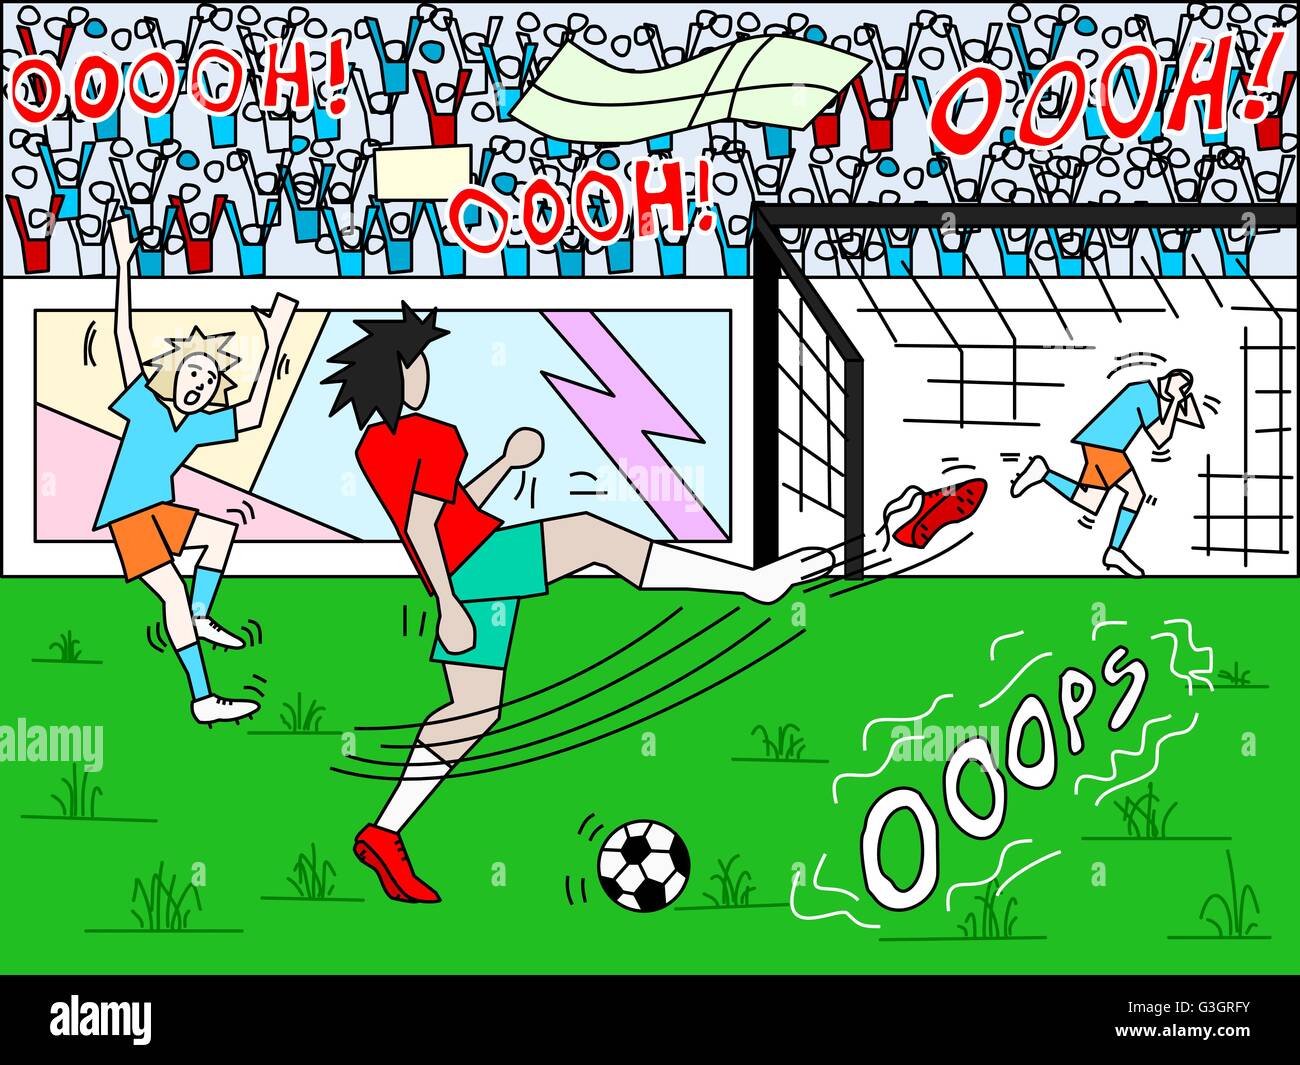 Comic illustration of a funny scene in a soccer game with player losing his football boot and crowd yelling Stock Vector